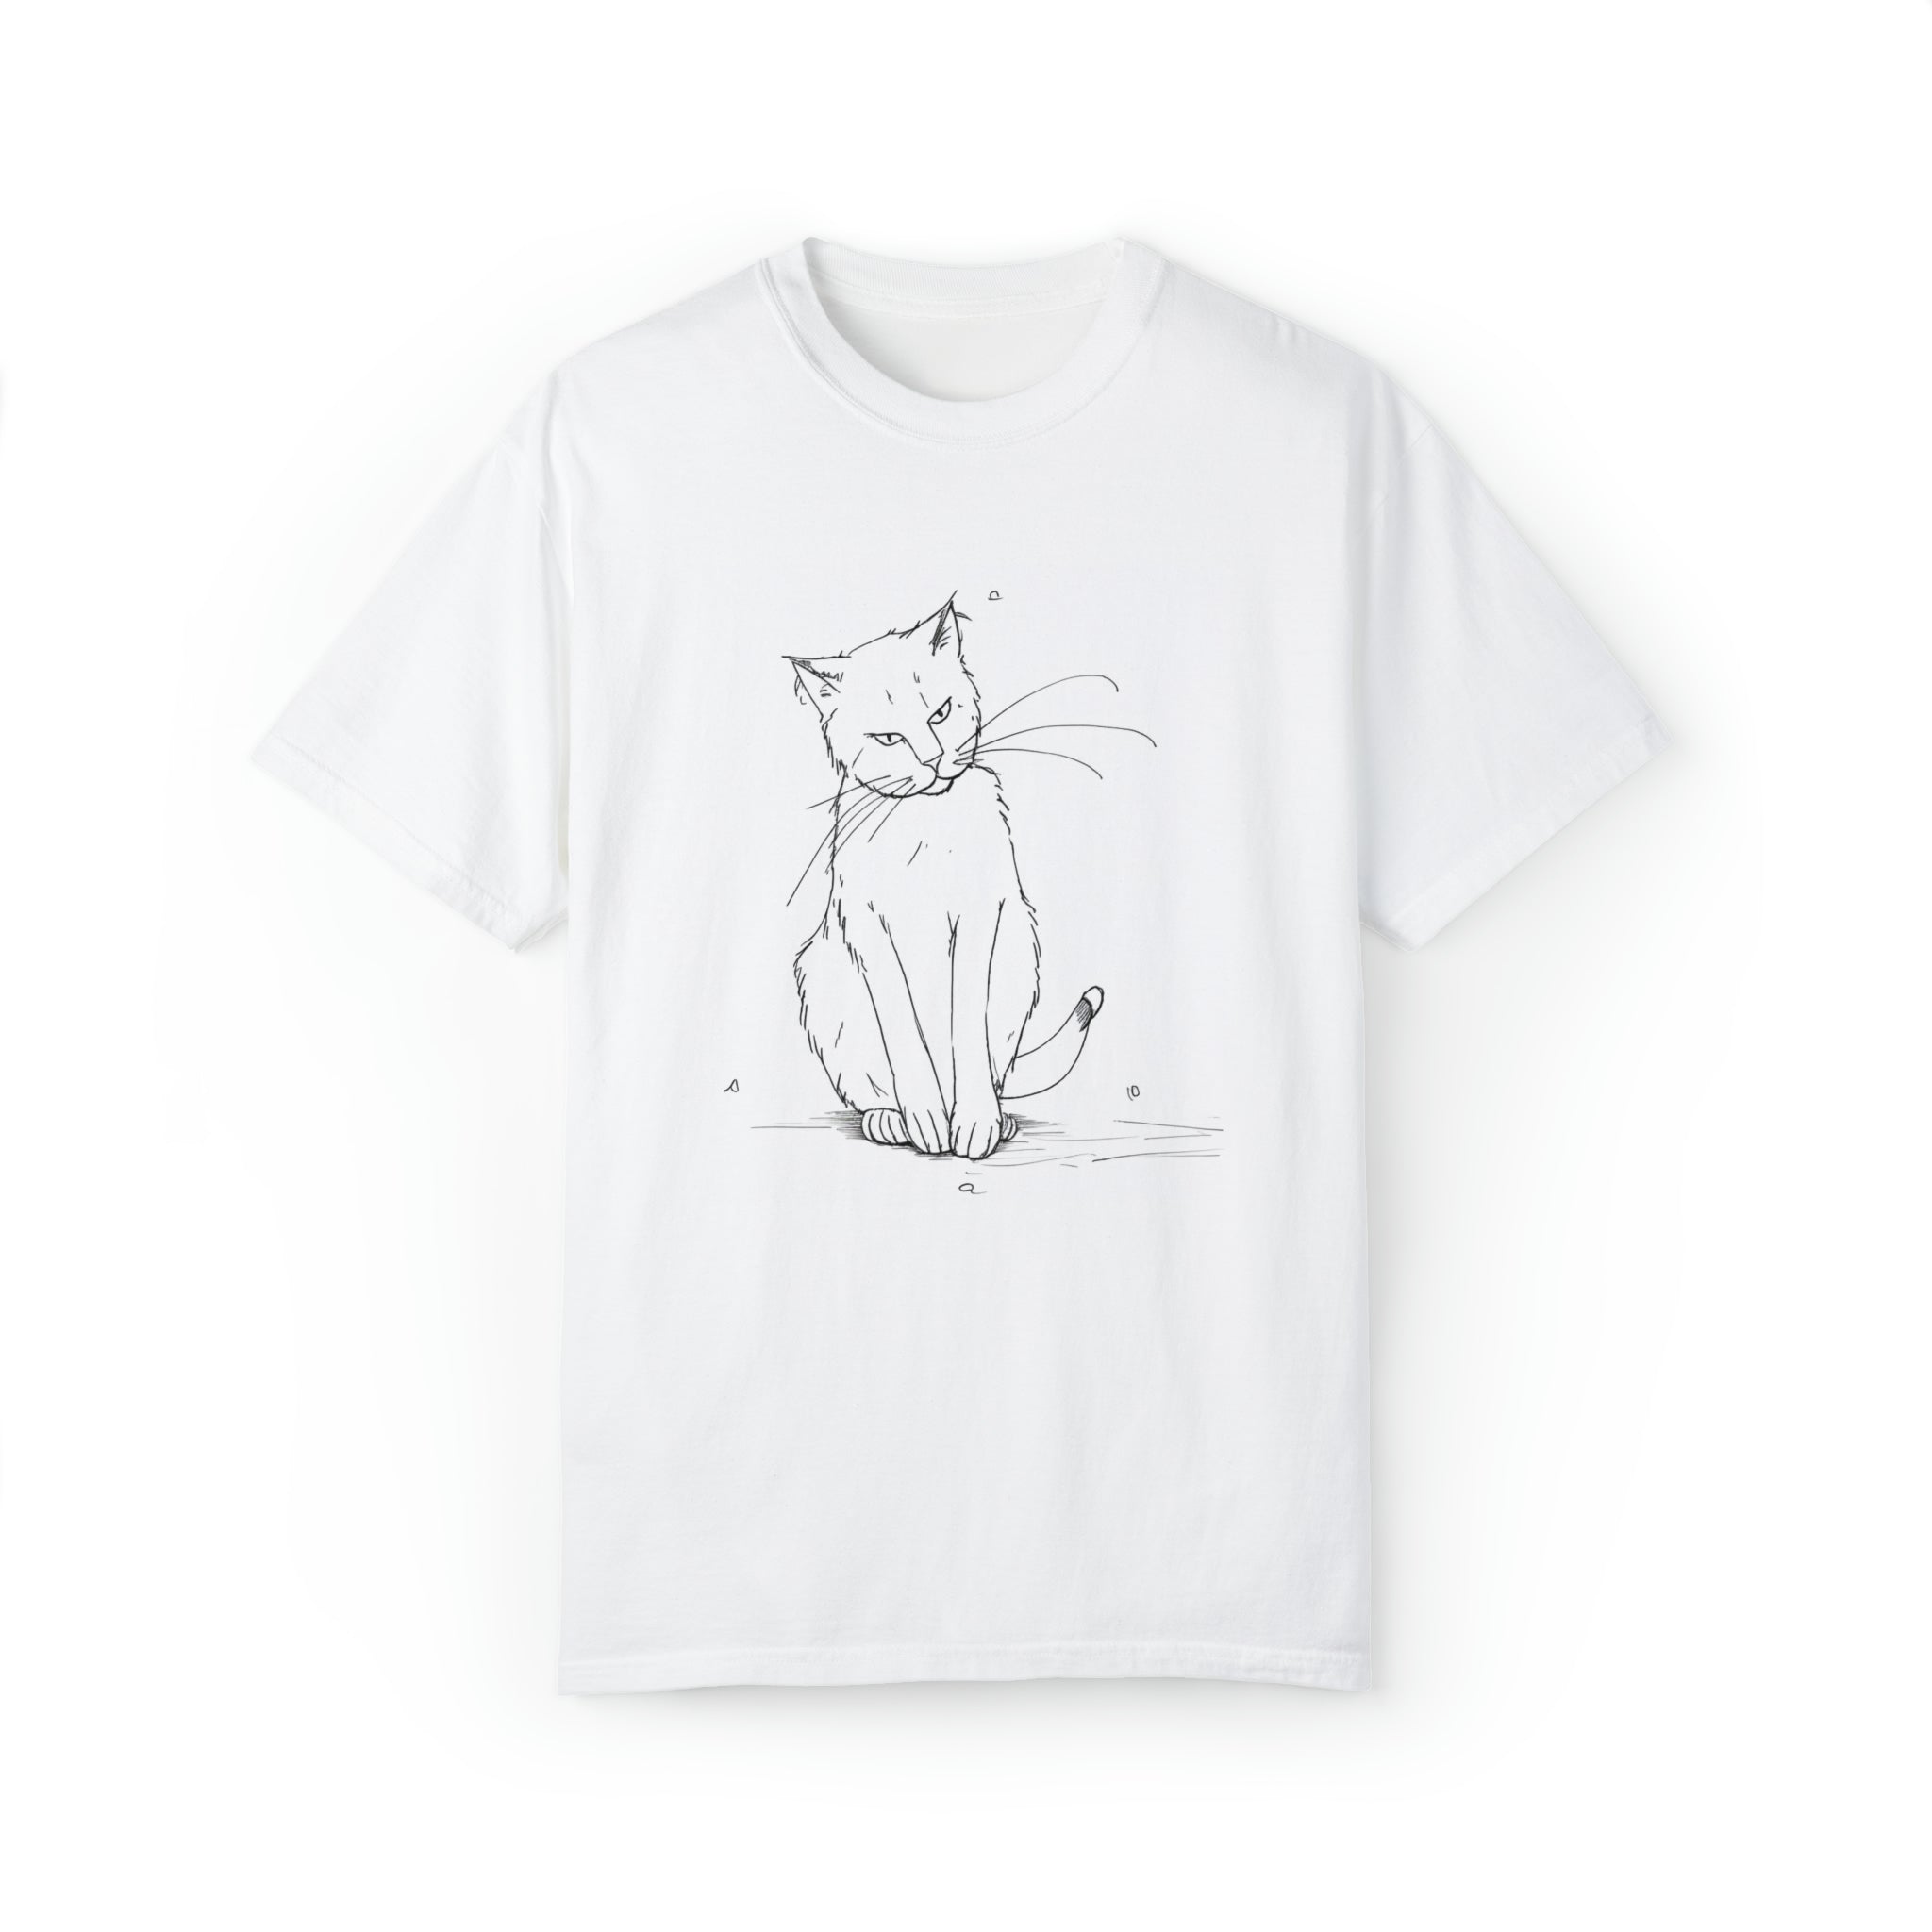 Cat Art T-Shirt Gift For Pet Lovers Tshirt For Cat Owners And Comfortable Wear For Walks T Shirt of Cat Drawing Art